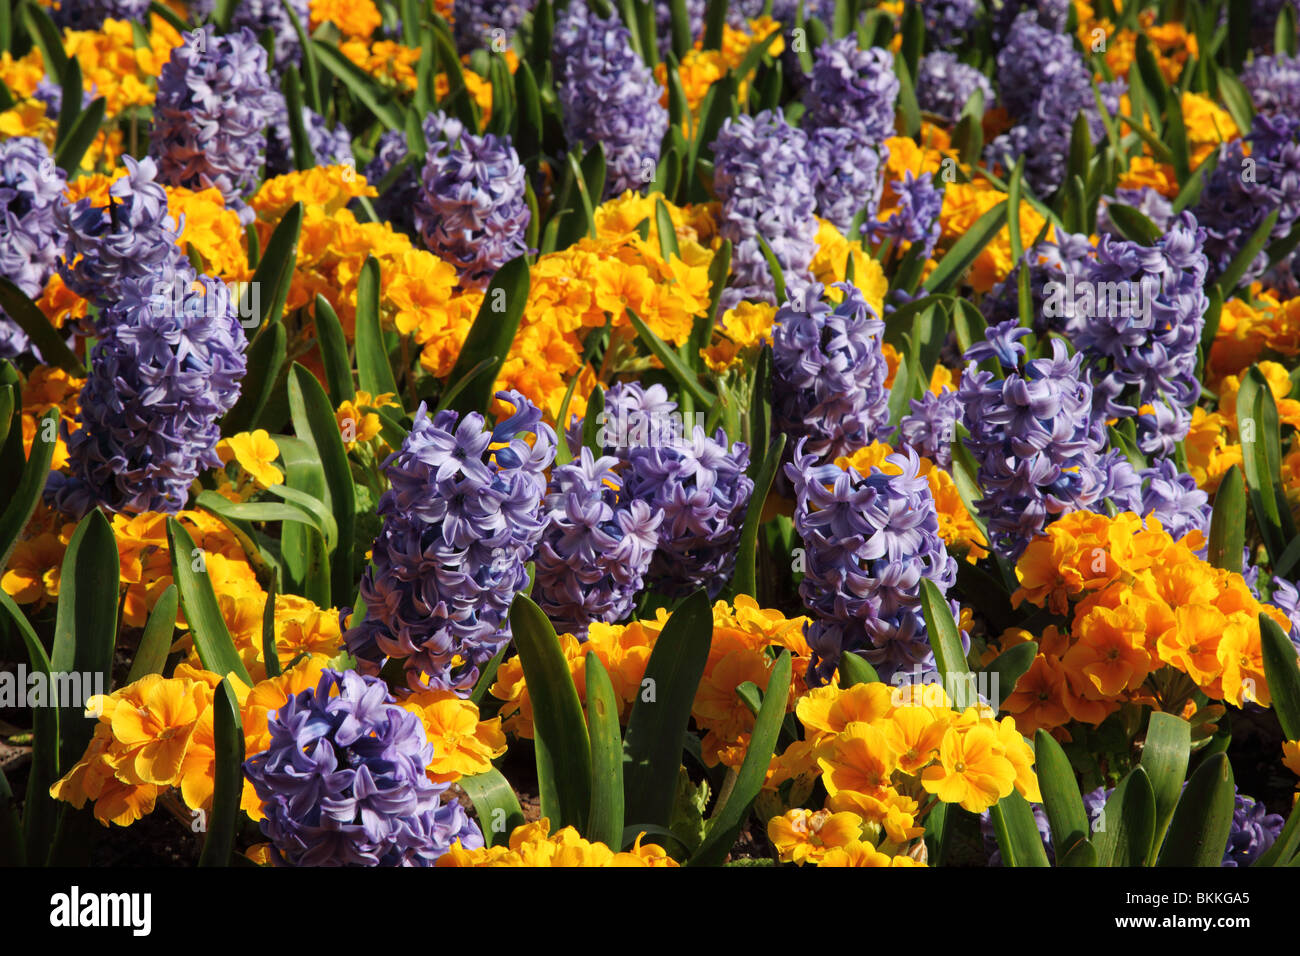 Planted display of brightly coloured spring flowers - Hyacinth and Primula Stock Photo